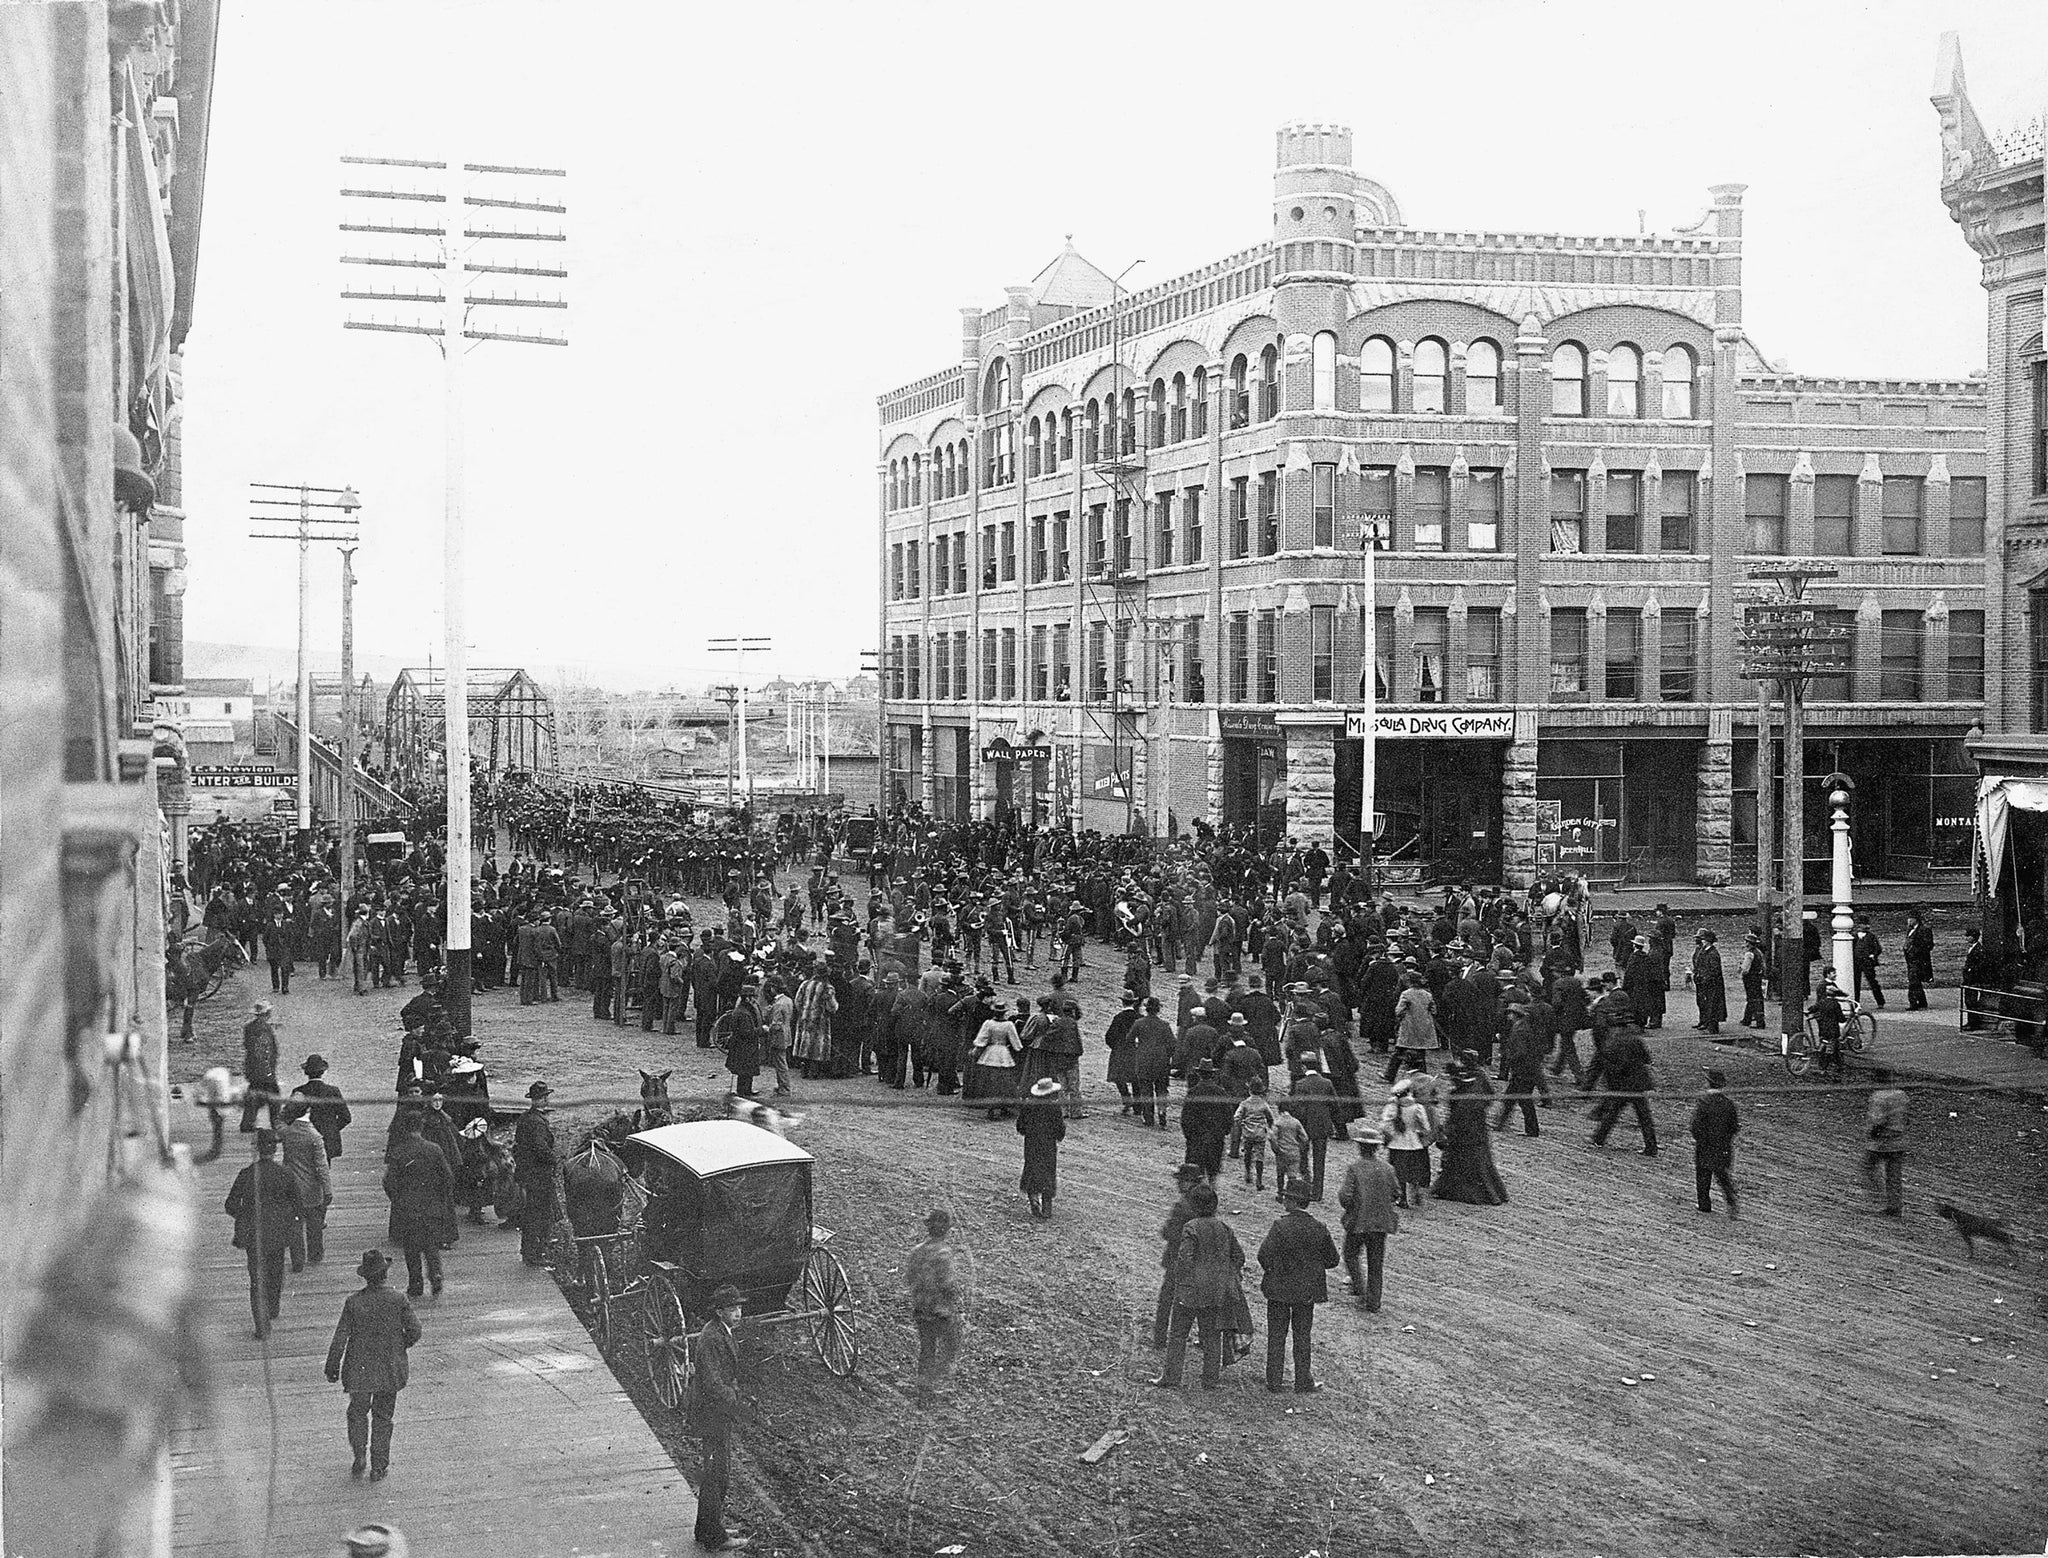 Crowd watching the departure of the United States Army’s 25th Infantry across Higgins Bridge in Missoula, April 10, 1898. Headed to Tampa, Florida, they were the first regiment to be active for the Spanish-American War. The Hammond Building is visible in the background. -- Image 76-0200, Courtesy Mansfield Library Archives, University of Montana